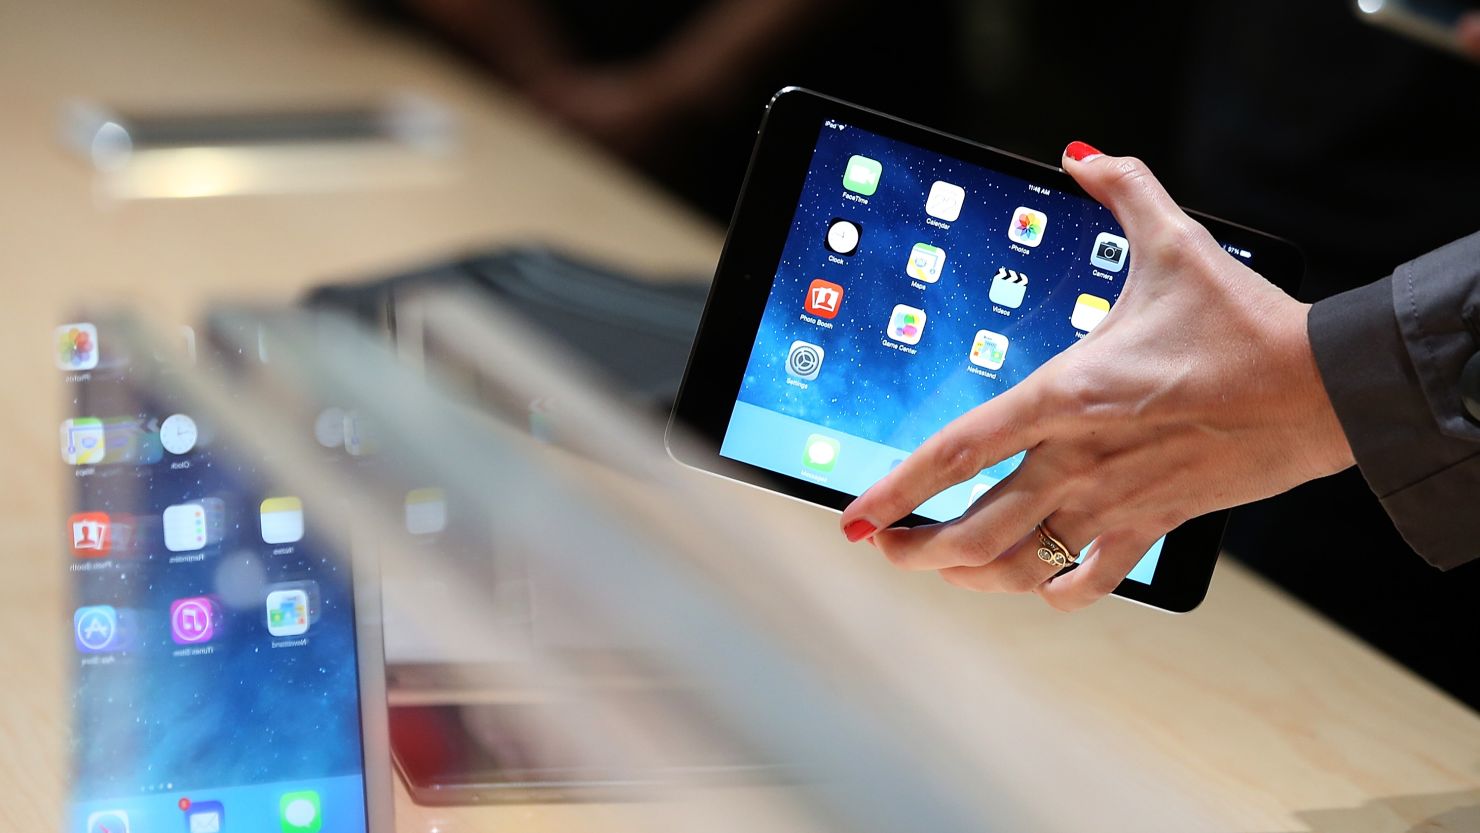 The new iPad Mini is set to be released later this month, though there have been reports of production delays.